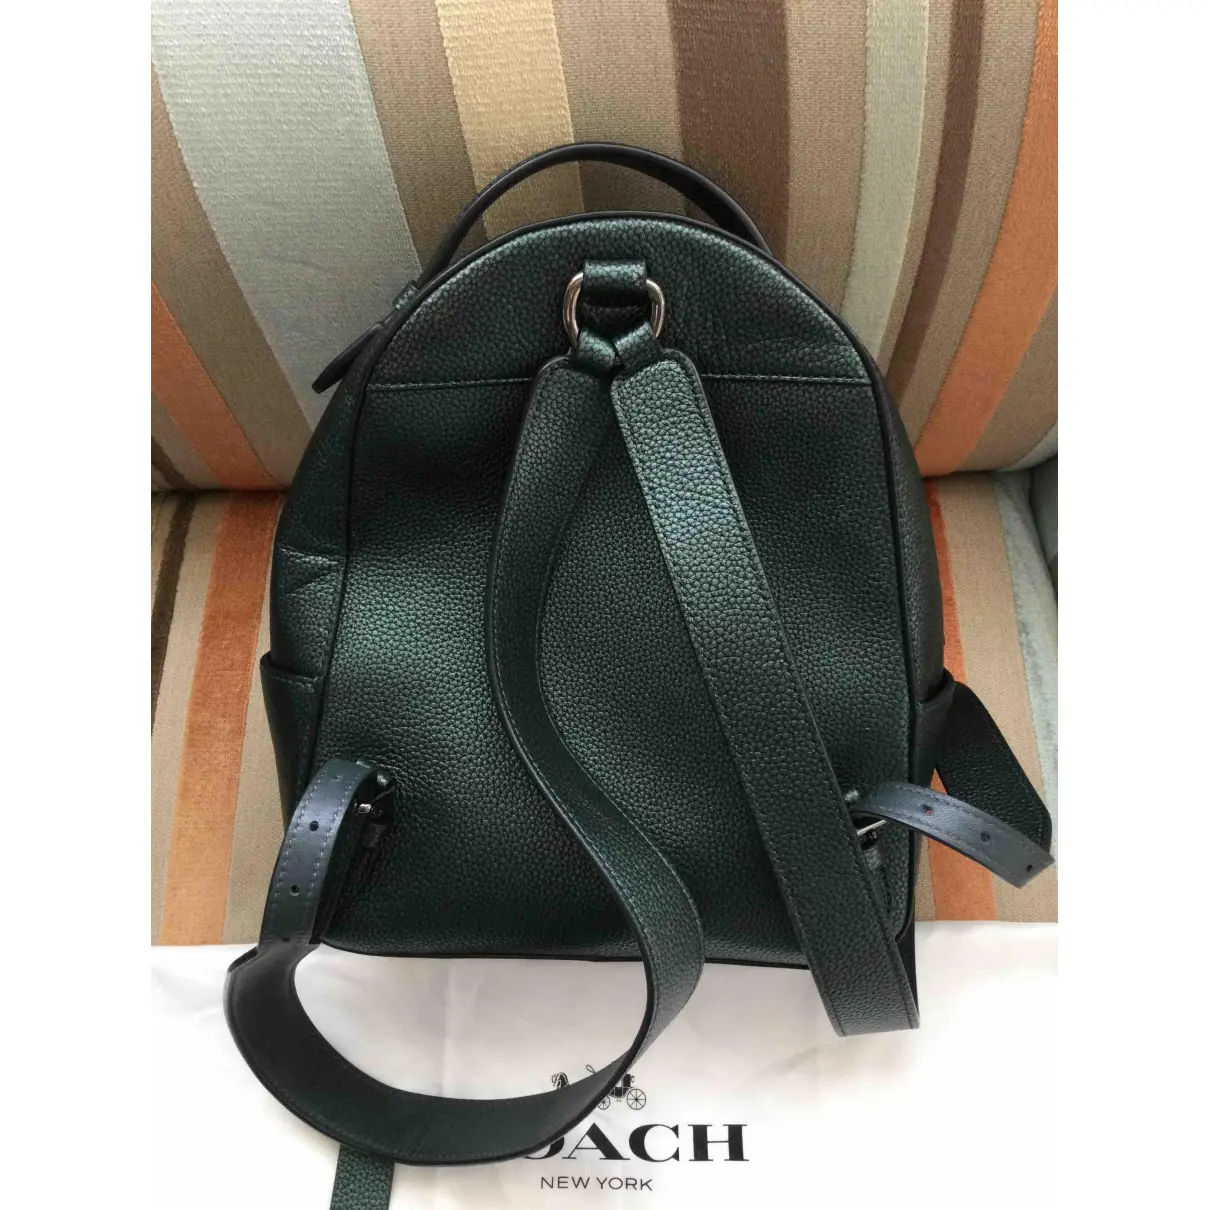 Buy Coach Leather backpack online